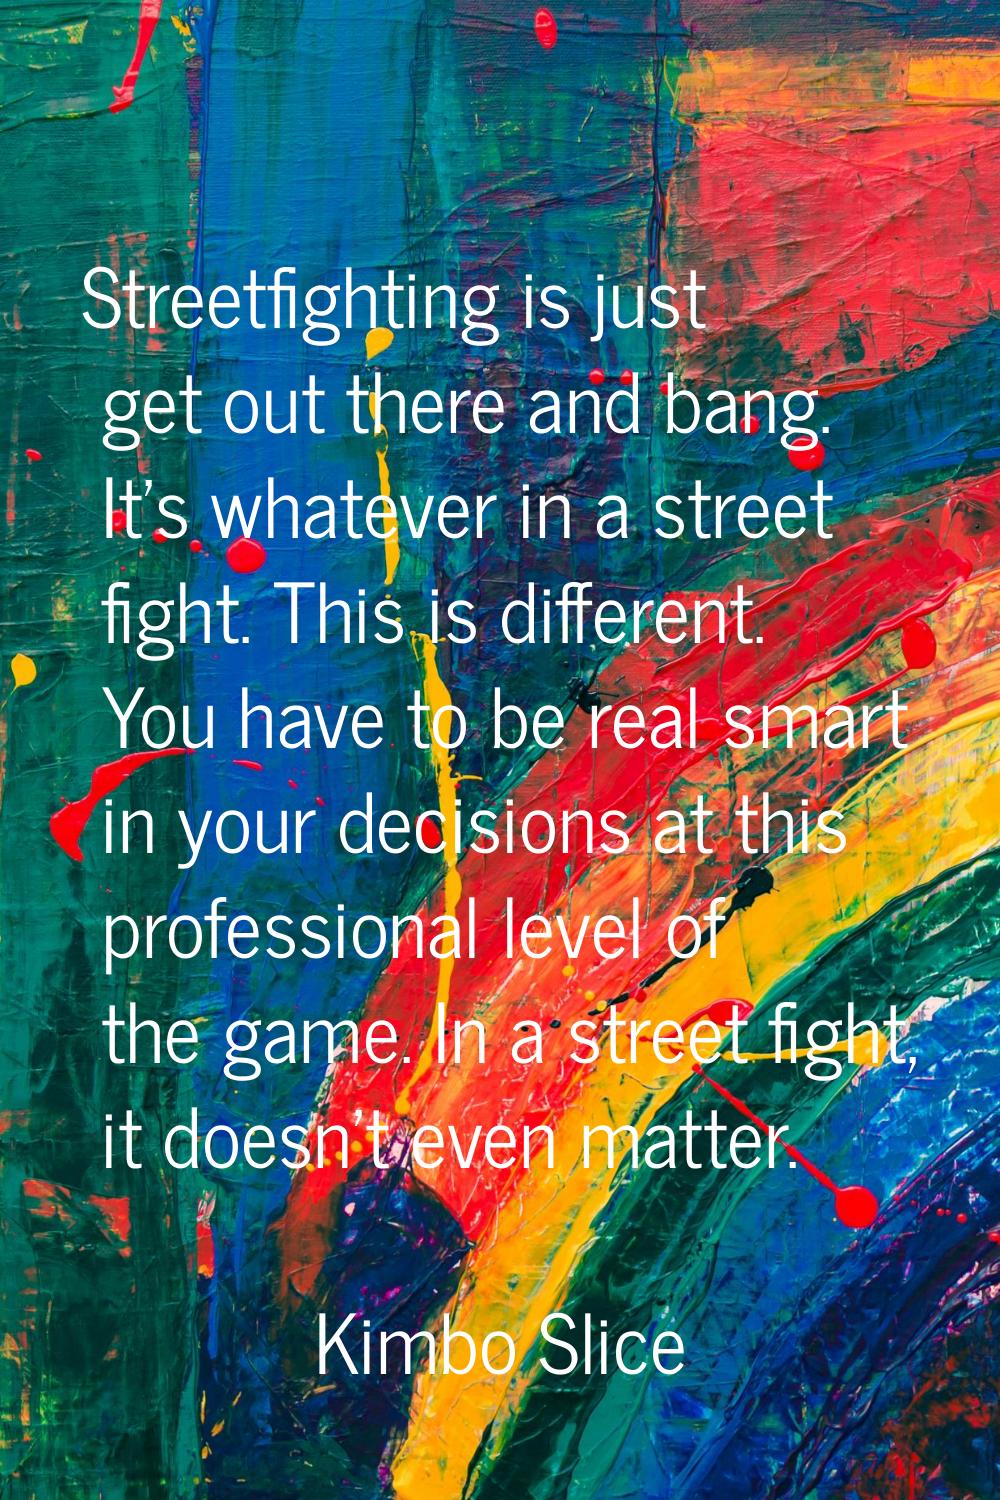 Streetfighting is just get out there and bang. It's whatever in a street fight. This is different. 